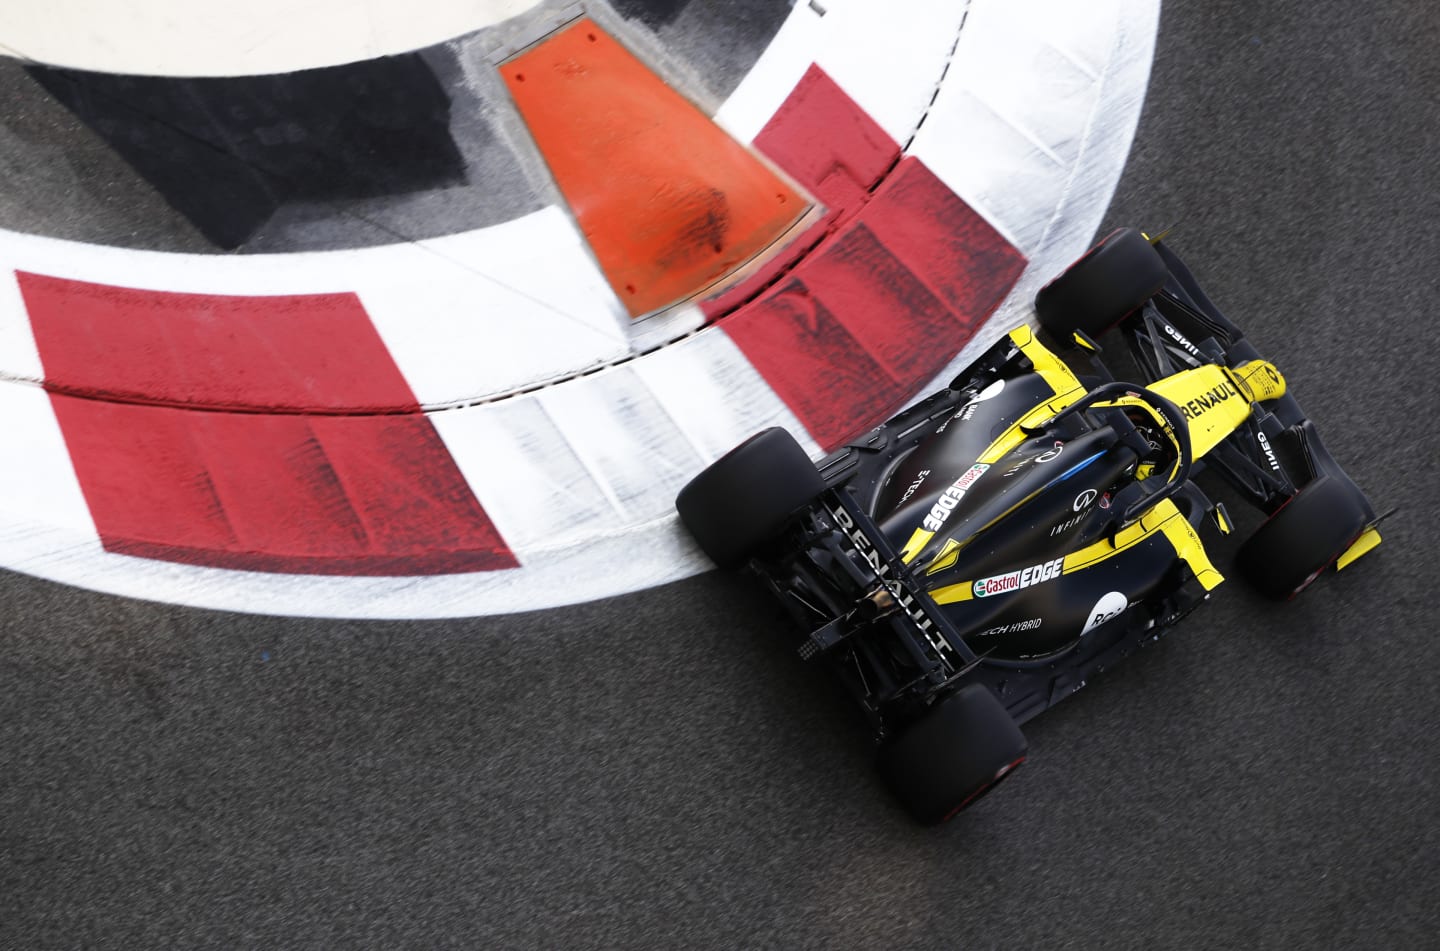 ABU DHABI, UNITED ARAB EMIRATES - DECEMBER 12: Daniel Ricciardo of Australia driving the (3) Renault Sport Formula One Team RS20 on track during final practice ahead of the F1 Grand Prix of Abu Dhabi at Yas Marina Circuit on December 12, 2020 in Abu Dhabi, United Arab Emirates. (Photo by Hamad I Mohammed - Pool/Getty Images)